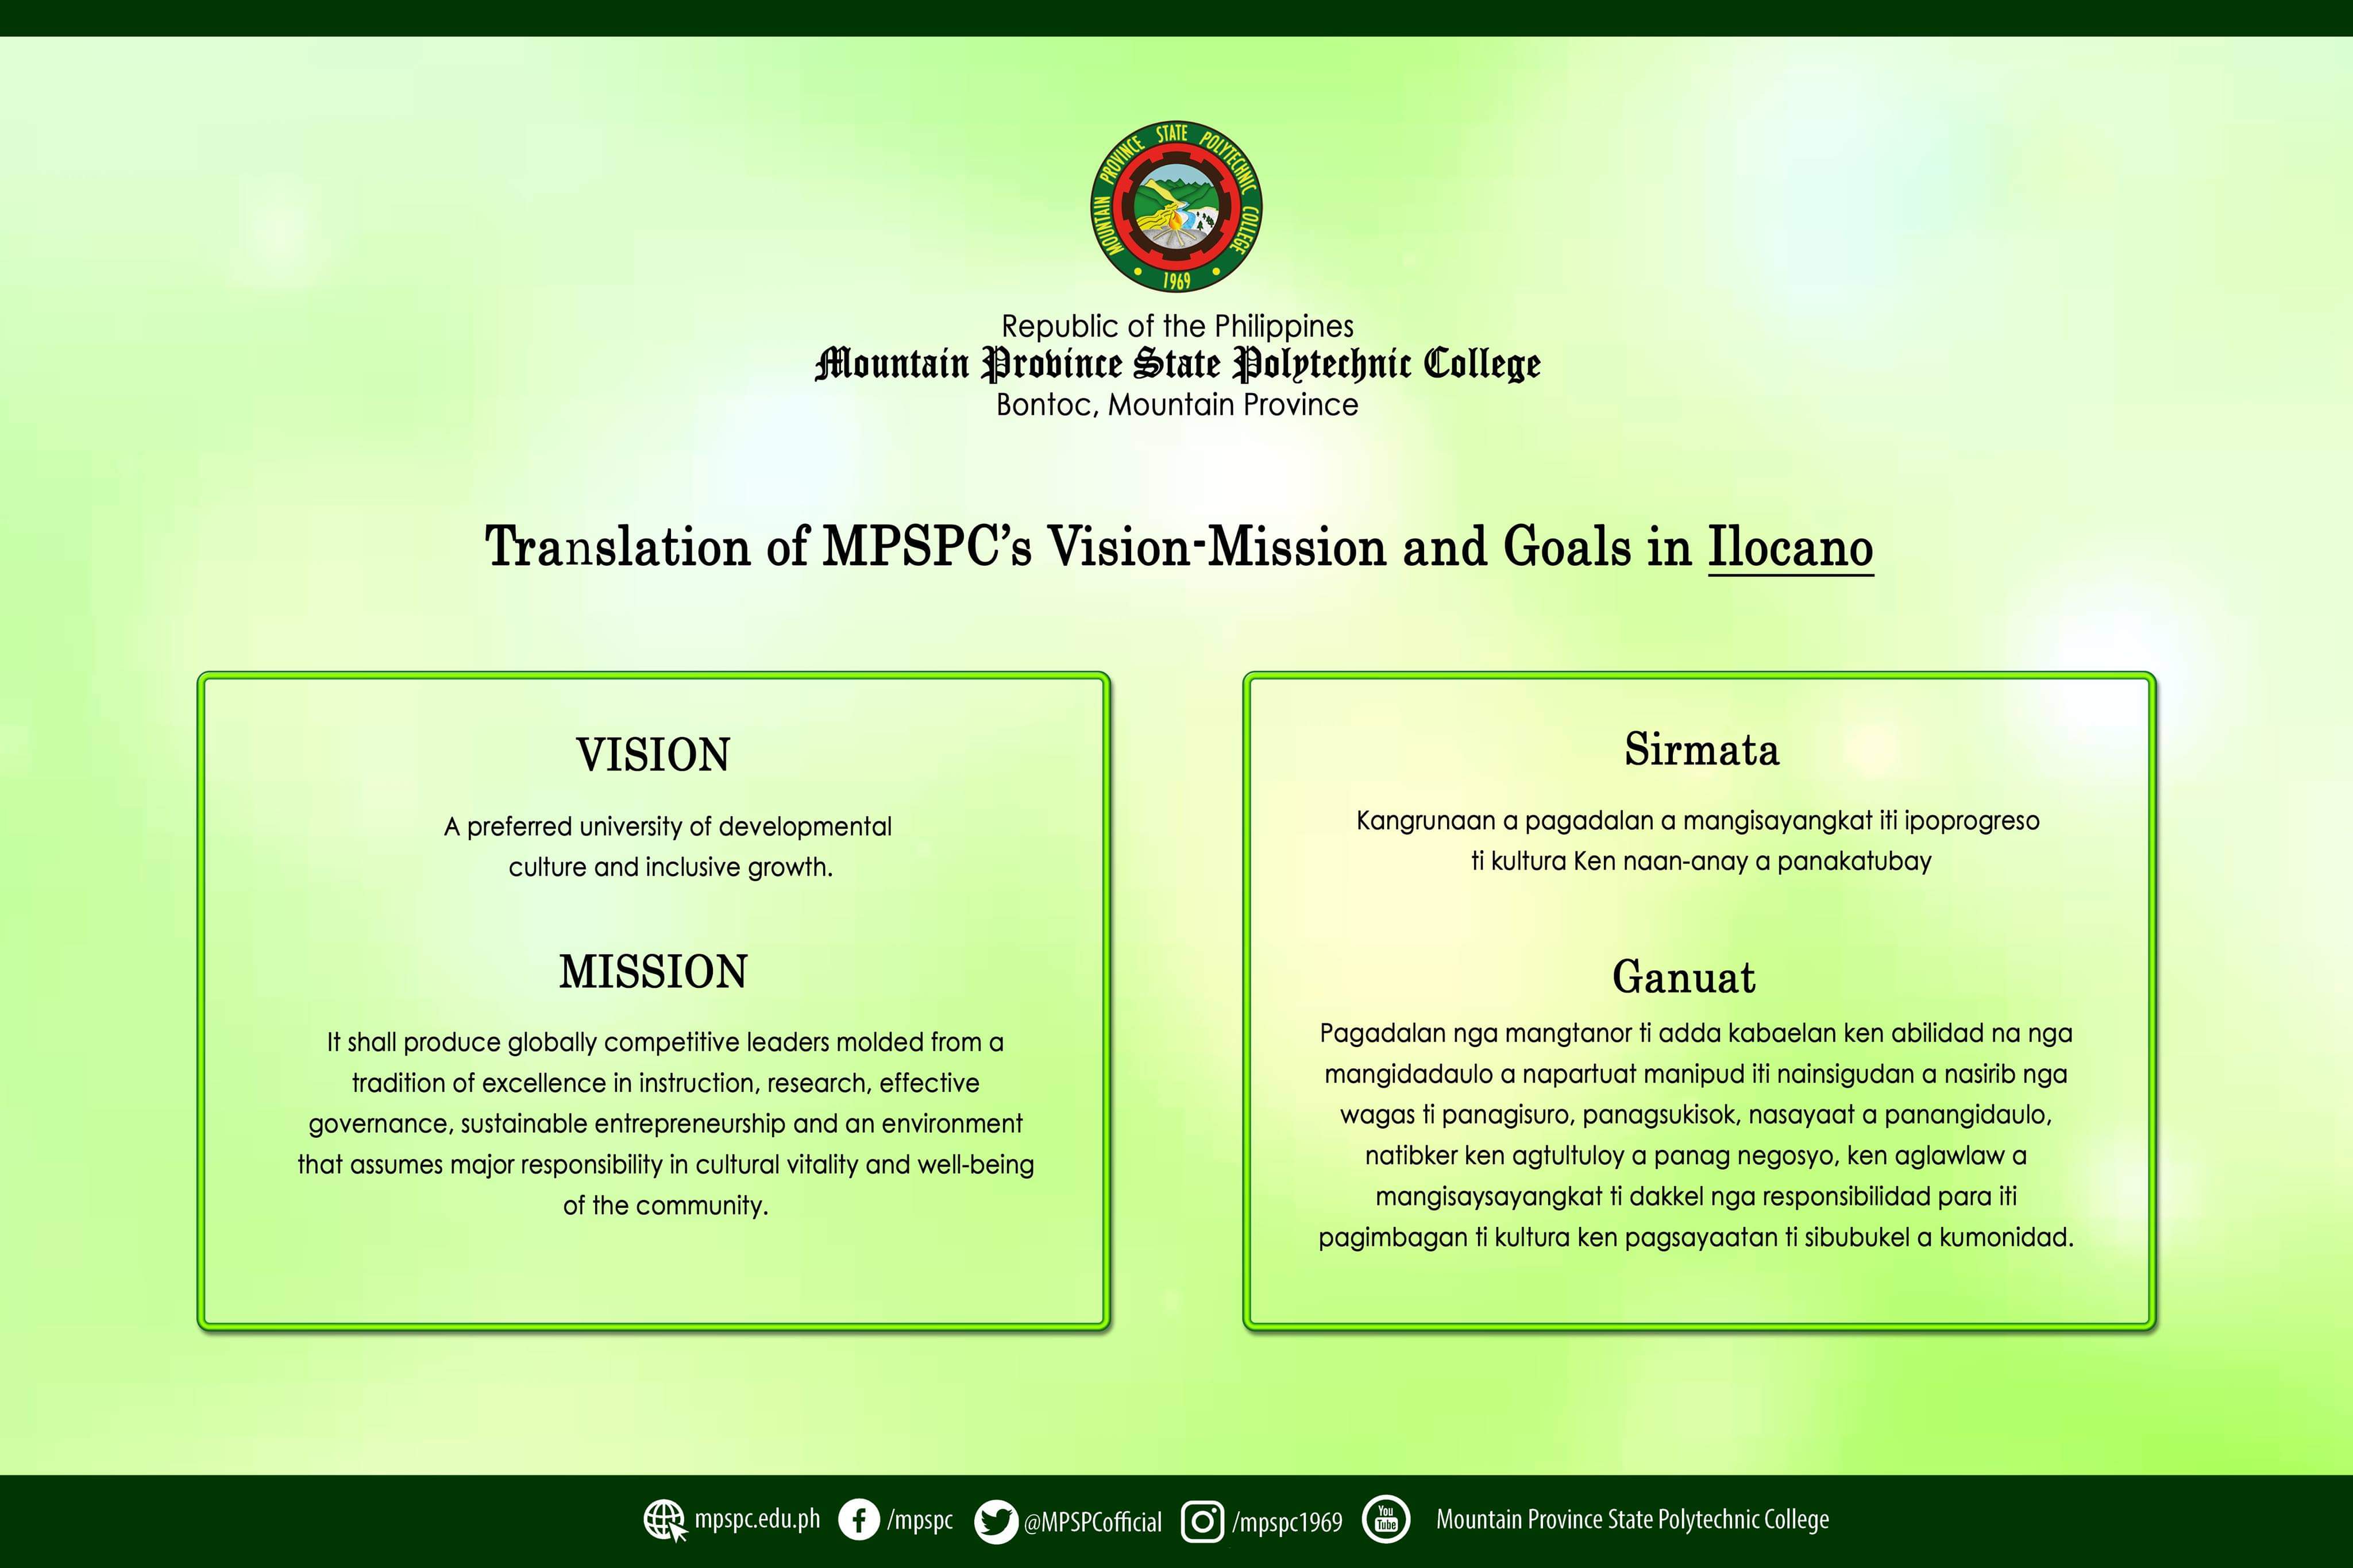 MPSPC - Translation of MPSPC's Vision-Mission and Goals